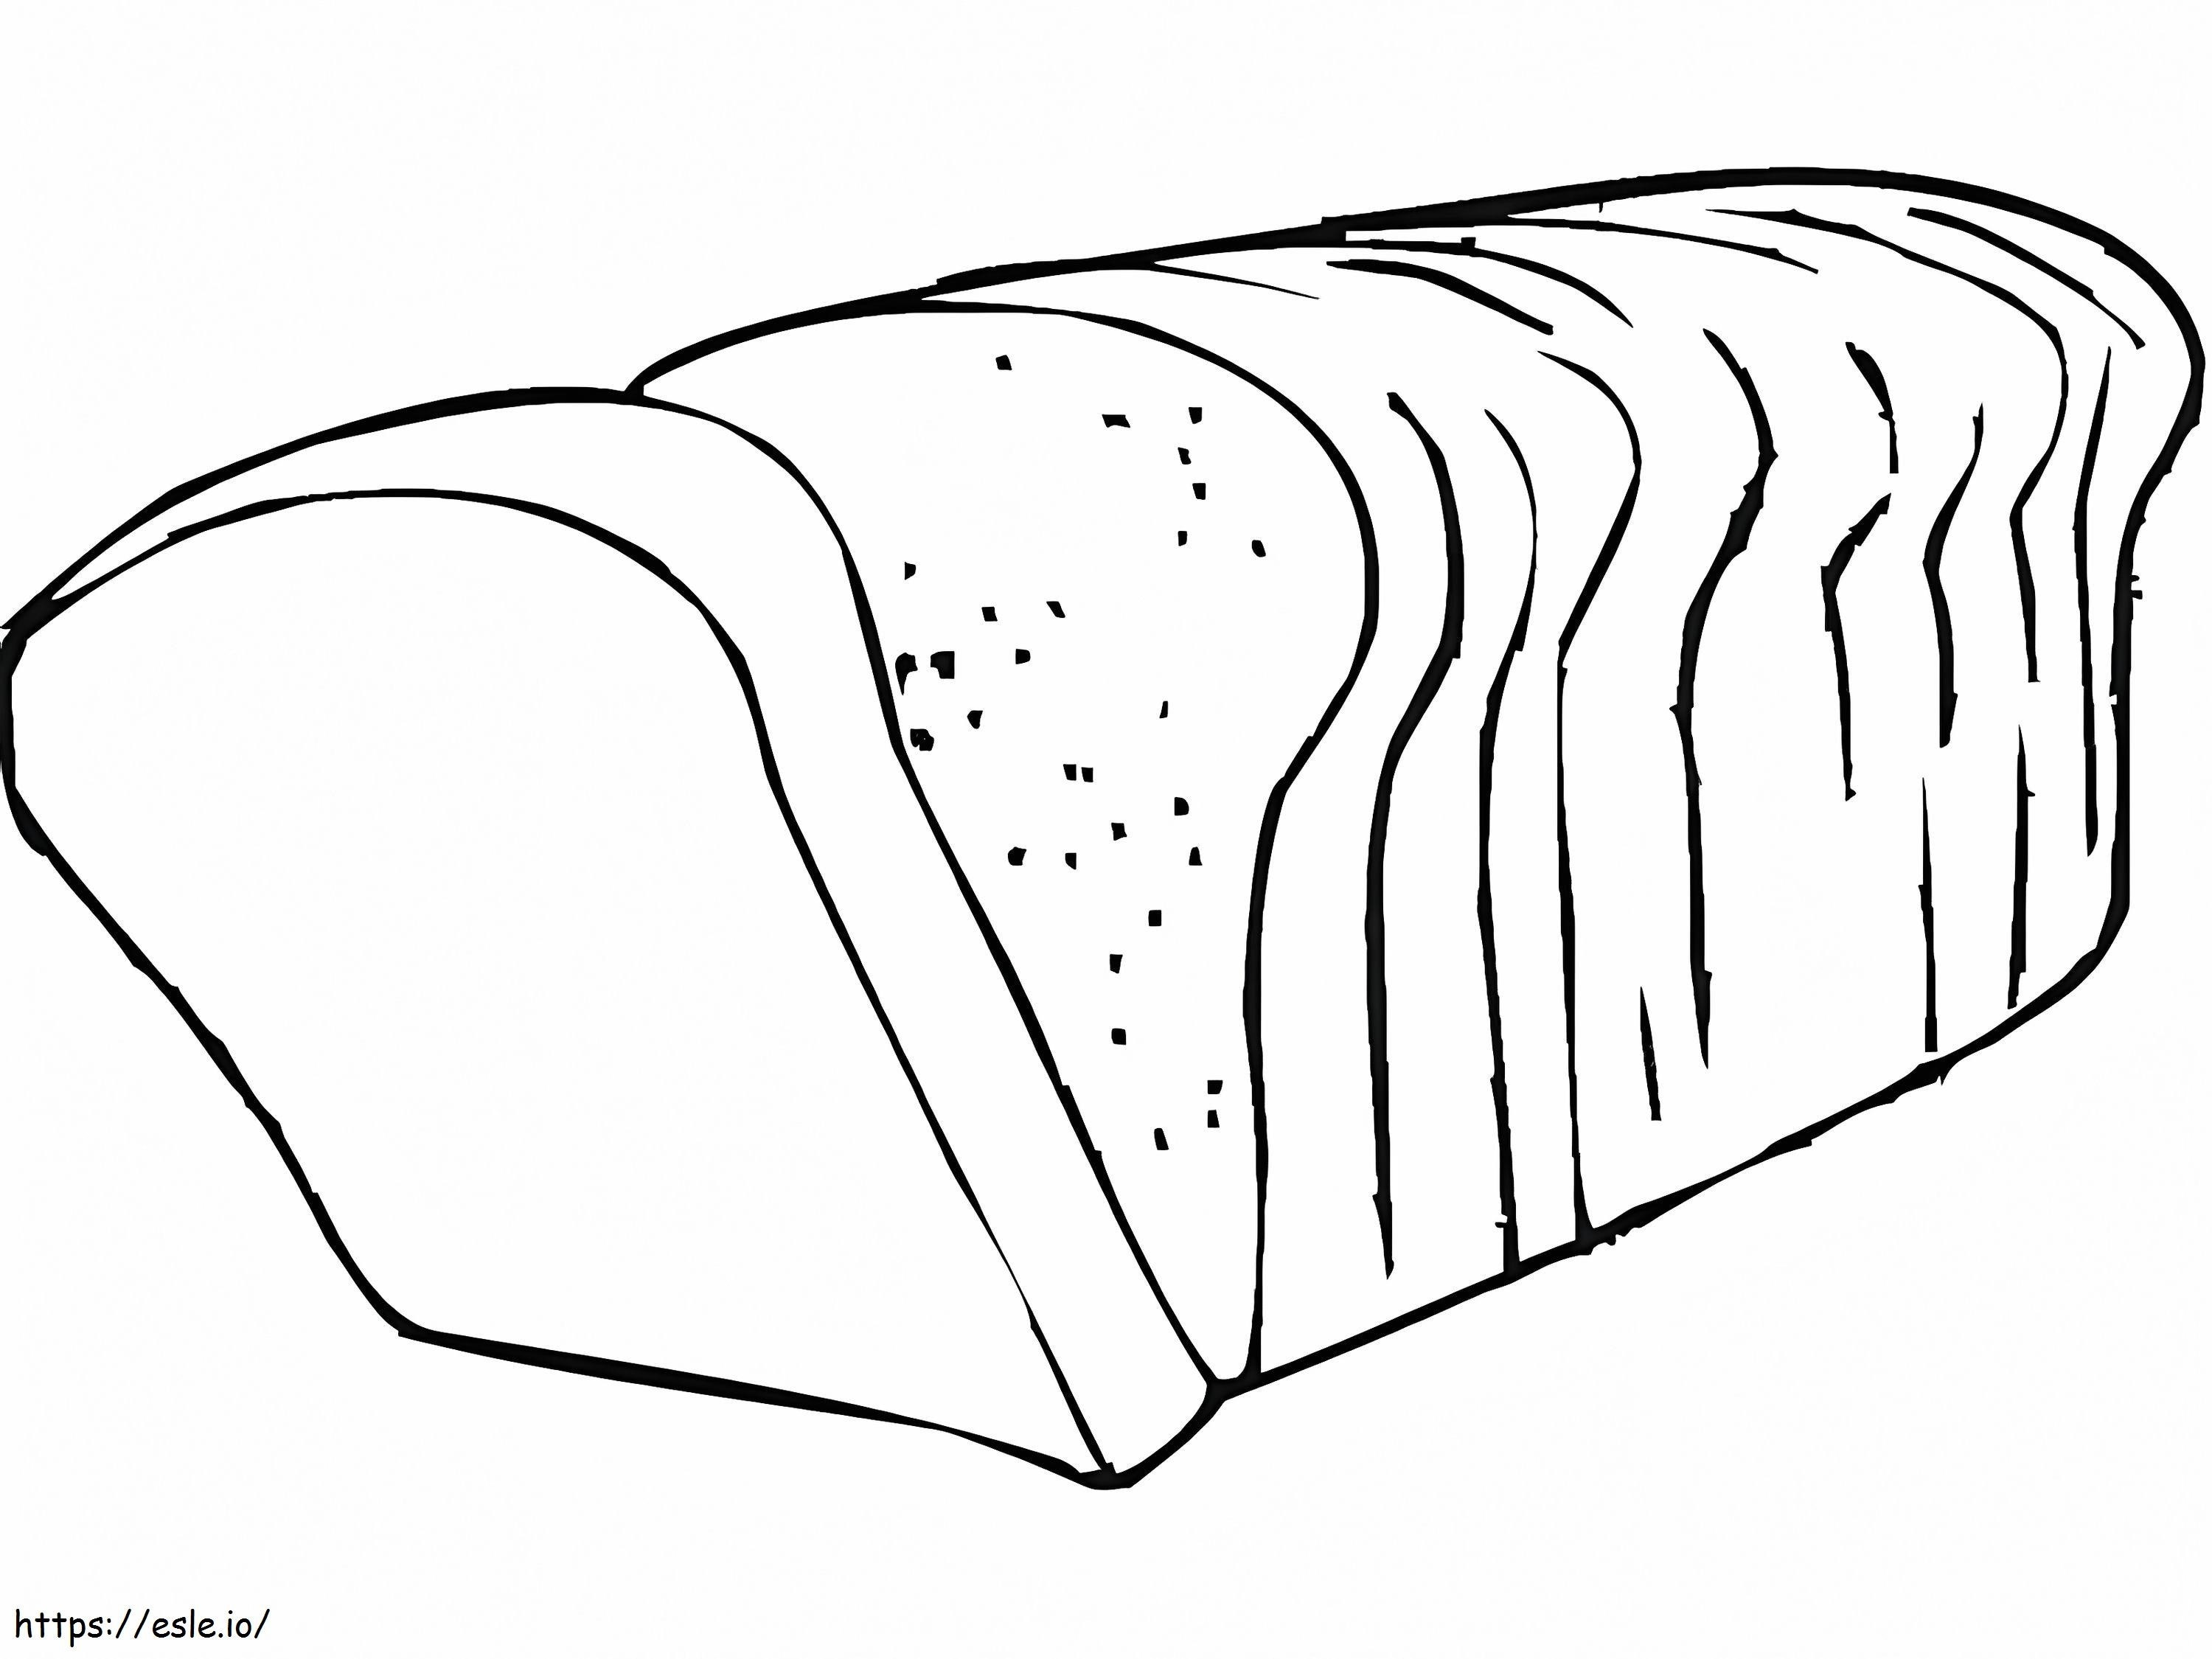 Free Printable Bread coloring page